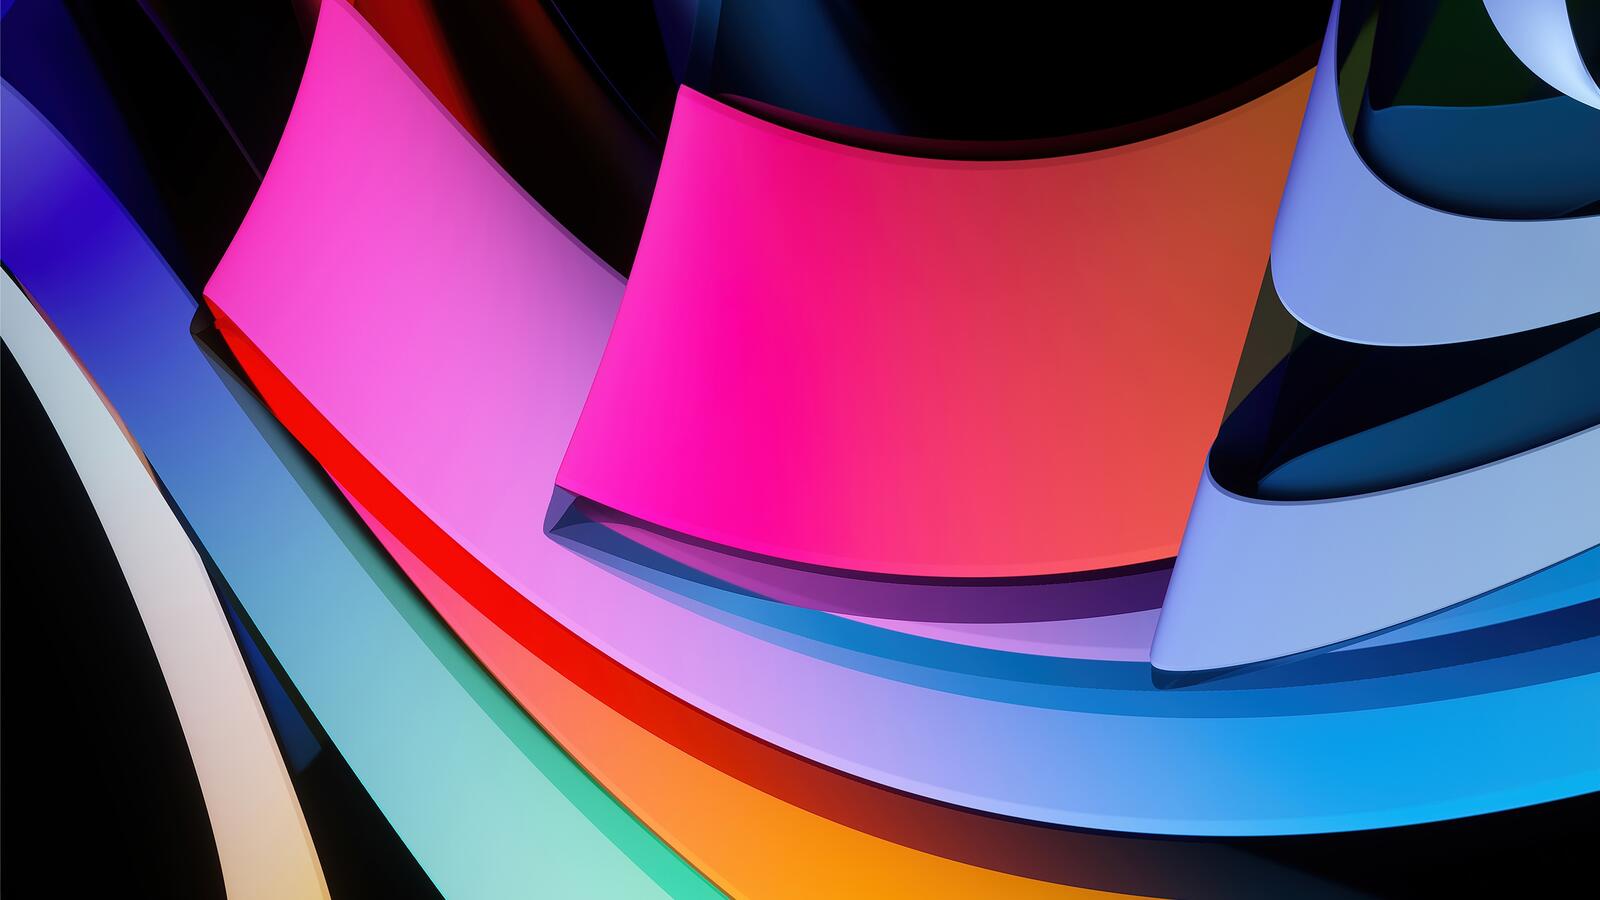 Wallpapers abstraction colorful glass on the desktop